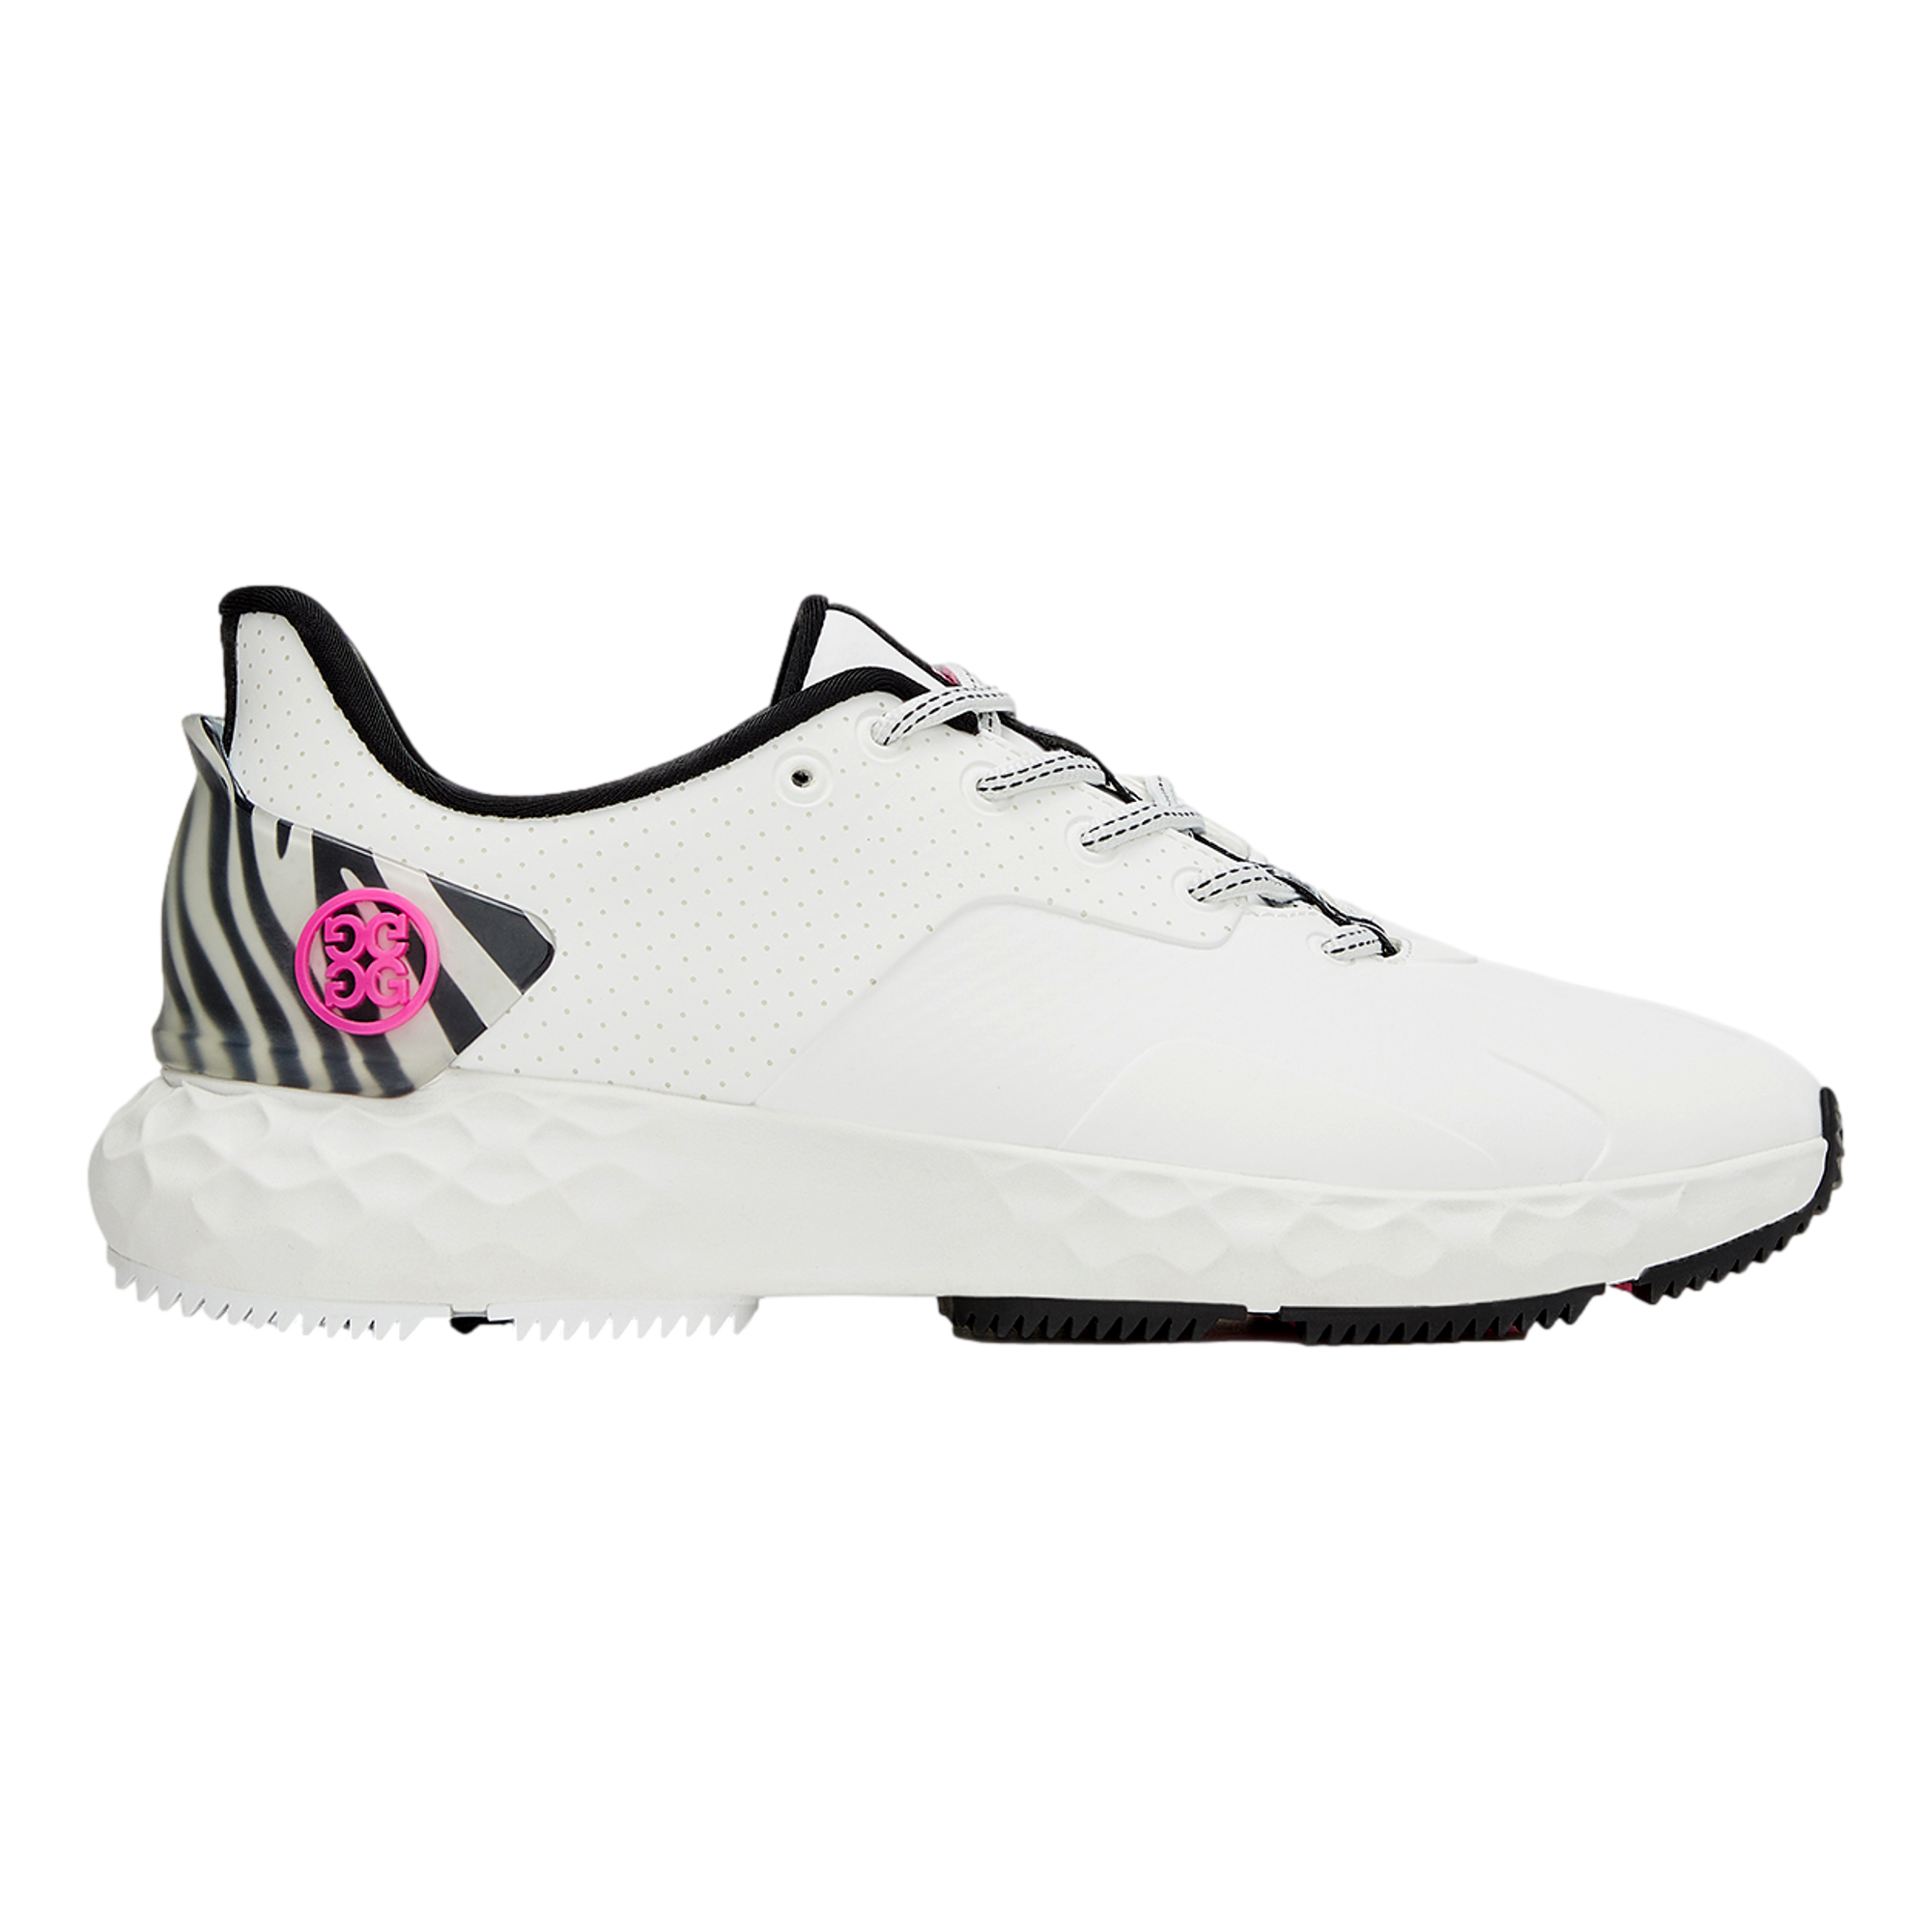 MG4+ Perforated Women's Golf Shoe